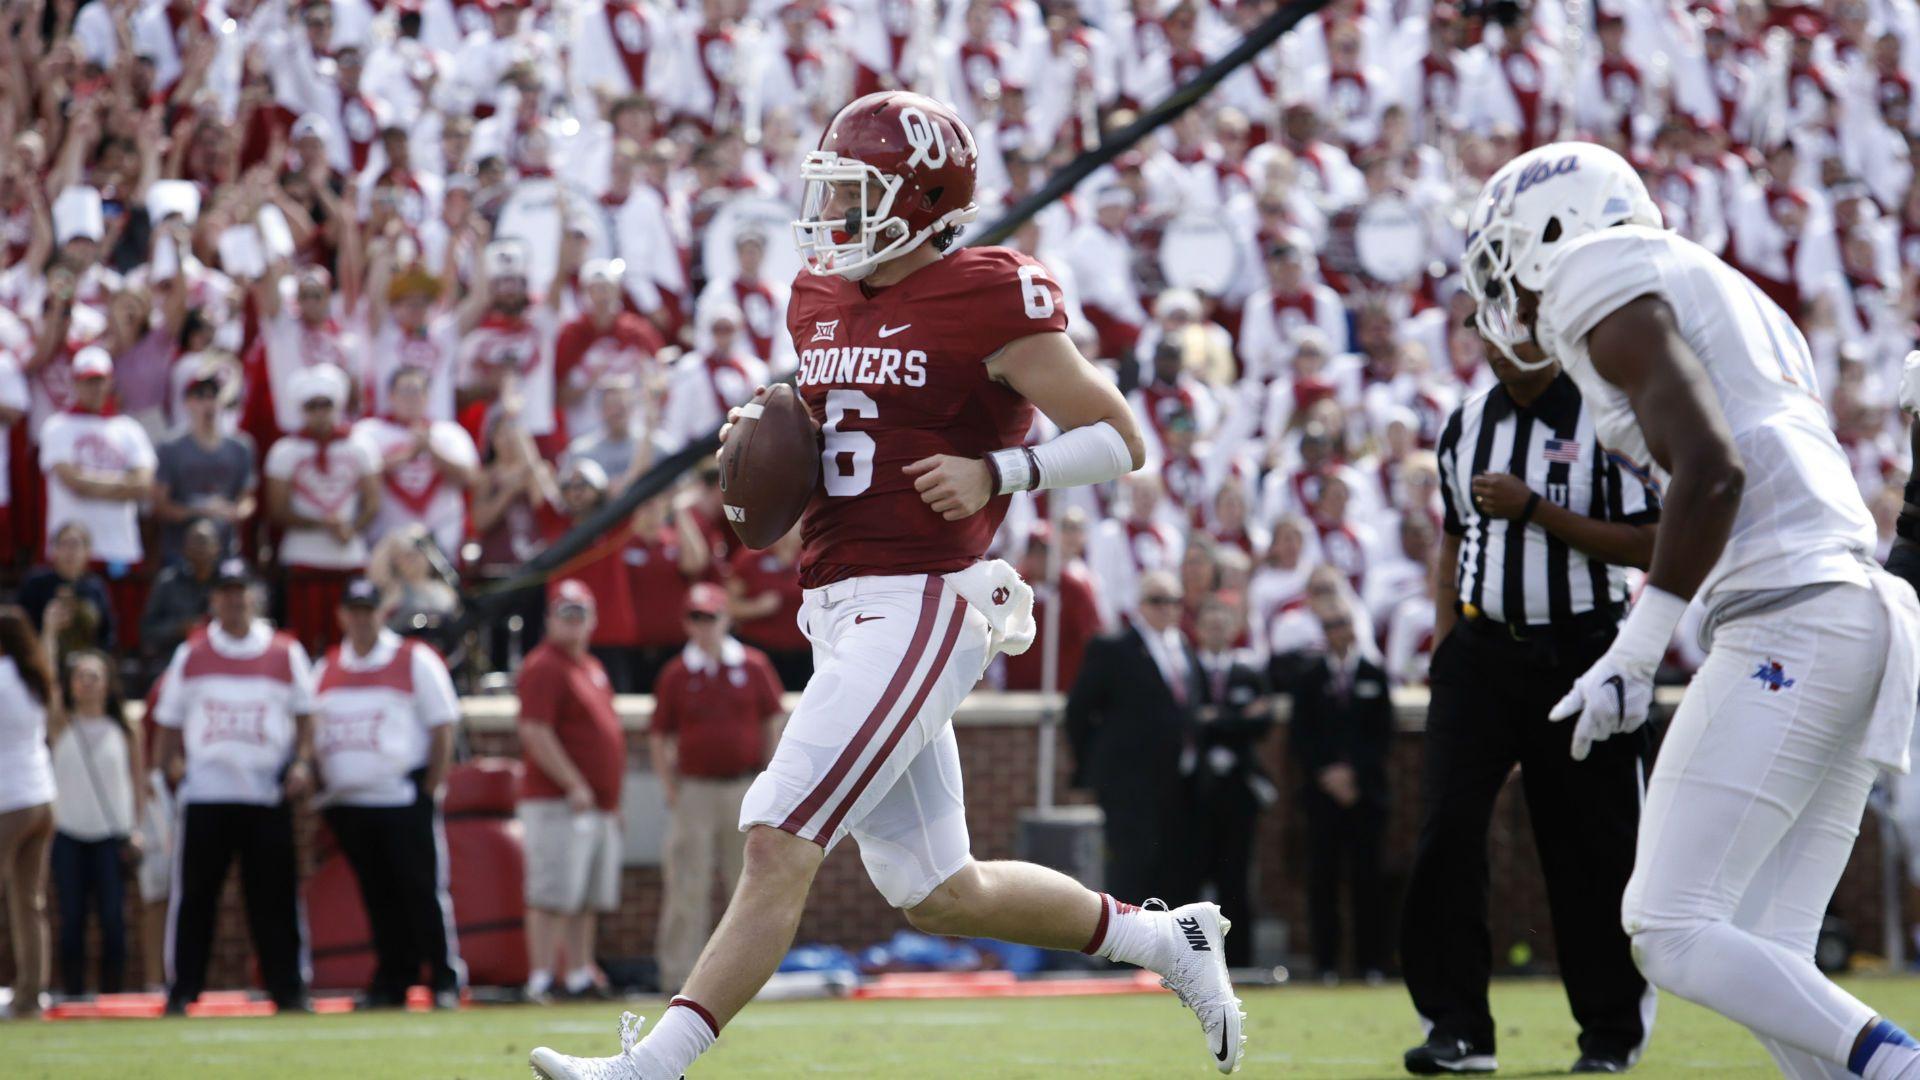 Baker Mayfield is just what Sooners need to knock off Baylor, TCU